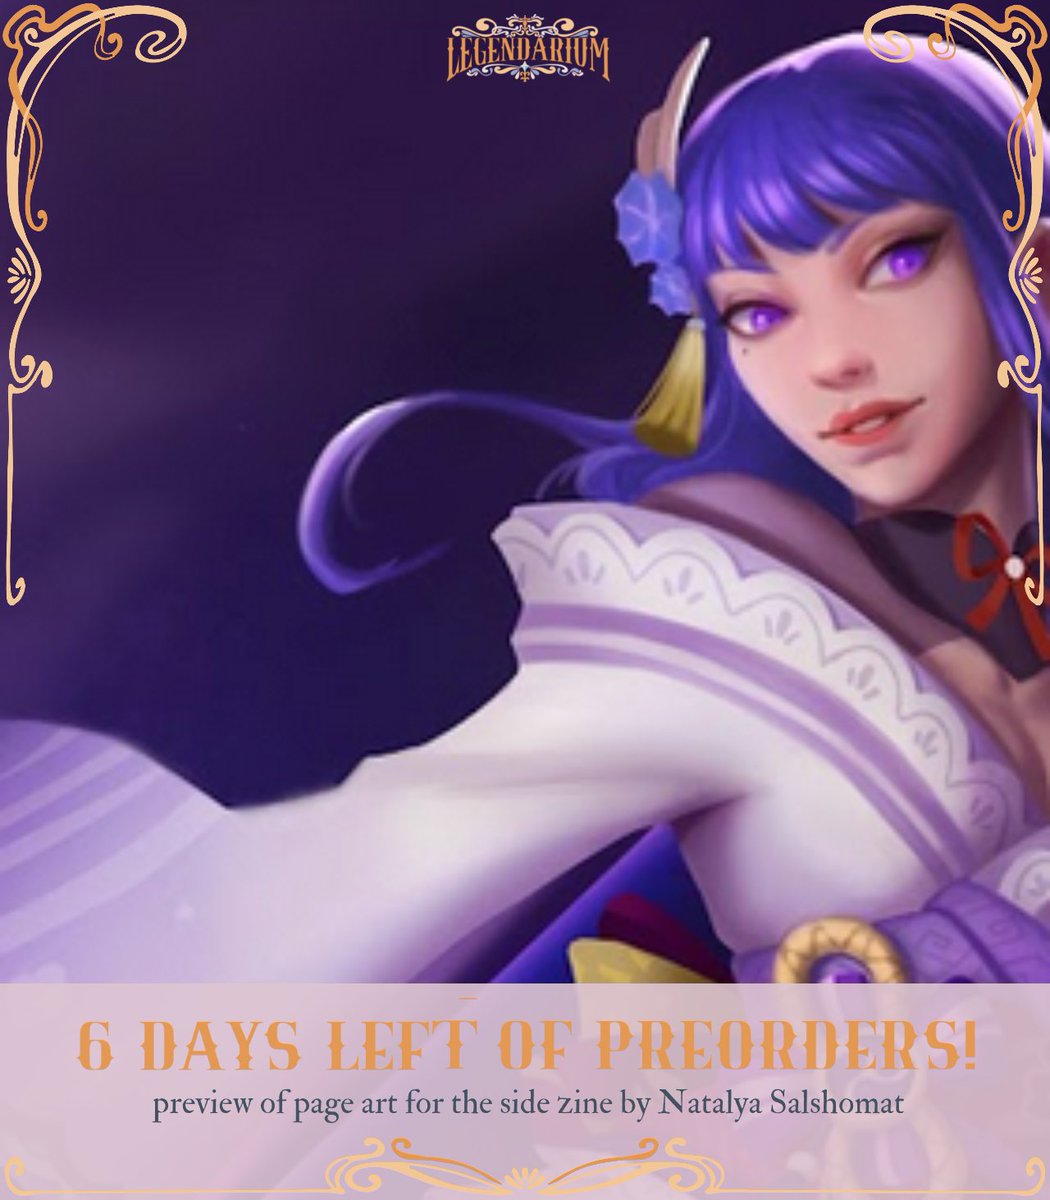 6 DAYS TO GO 💜⚡️ Be as quick as lightning, because The Legendarium Preorders close in 6 days! We won't be extending again this time!!! Choose from 5 fascinating bundles, filled with amazing goodies and bonuses! 🛒mythicalteyvat.bigcartel.com